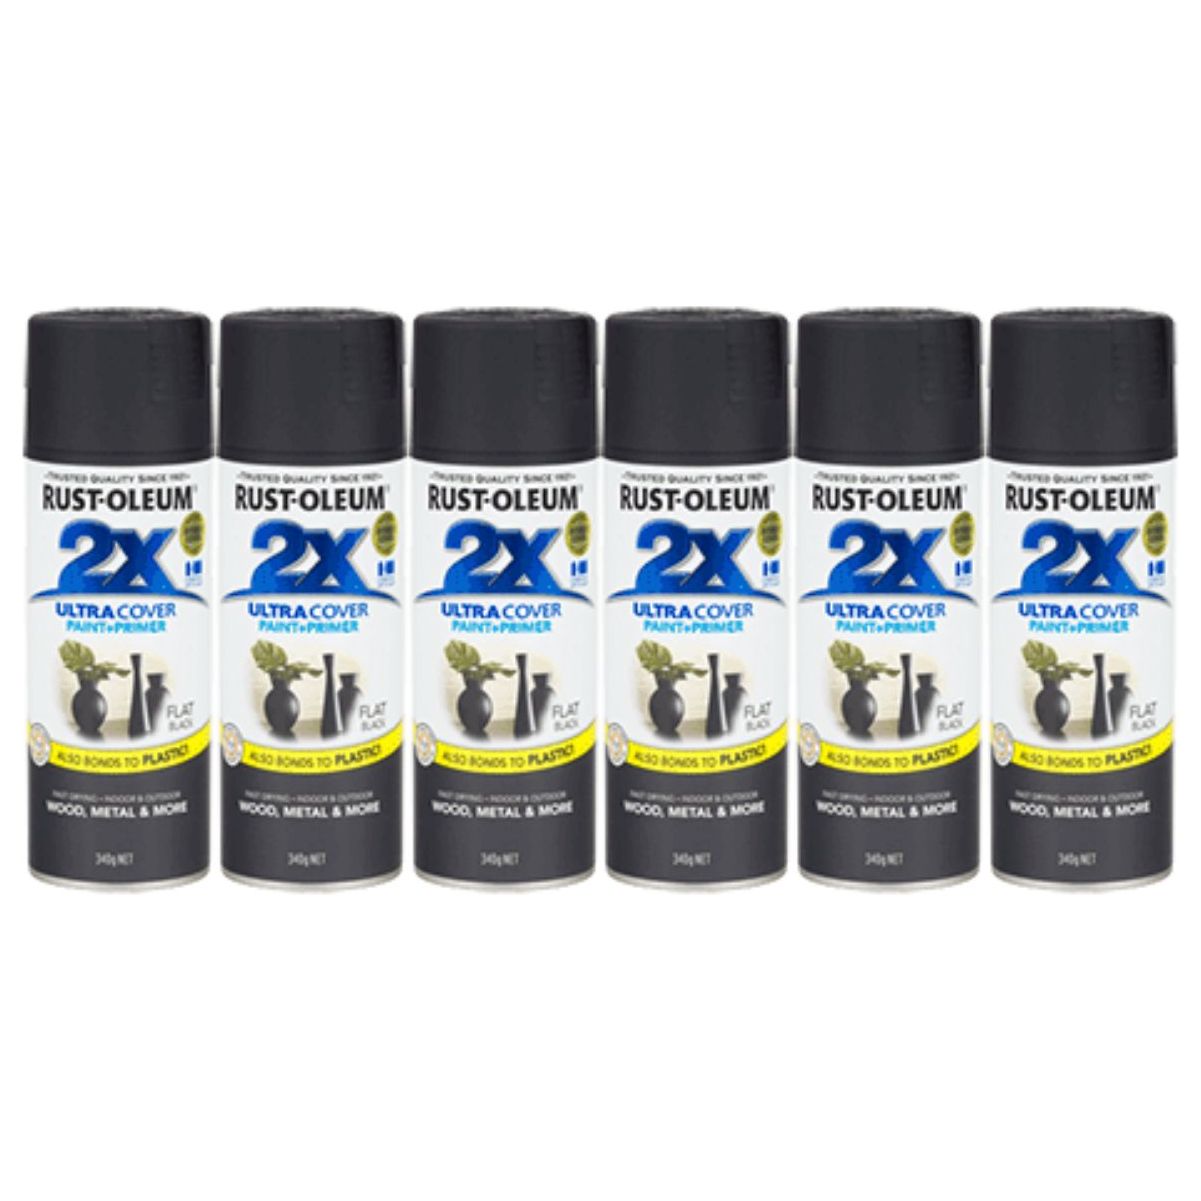 6 Cans | RUST-OLEUM 2X Ultra Cover Flat Paint & Primer Spray Paint 340g | 276323 Flat Black - South East Clearance Centre